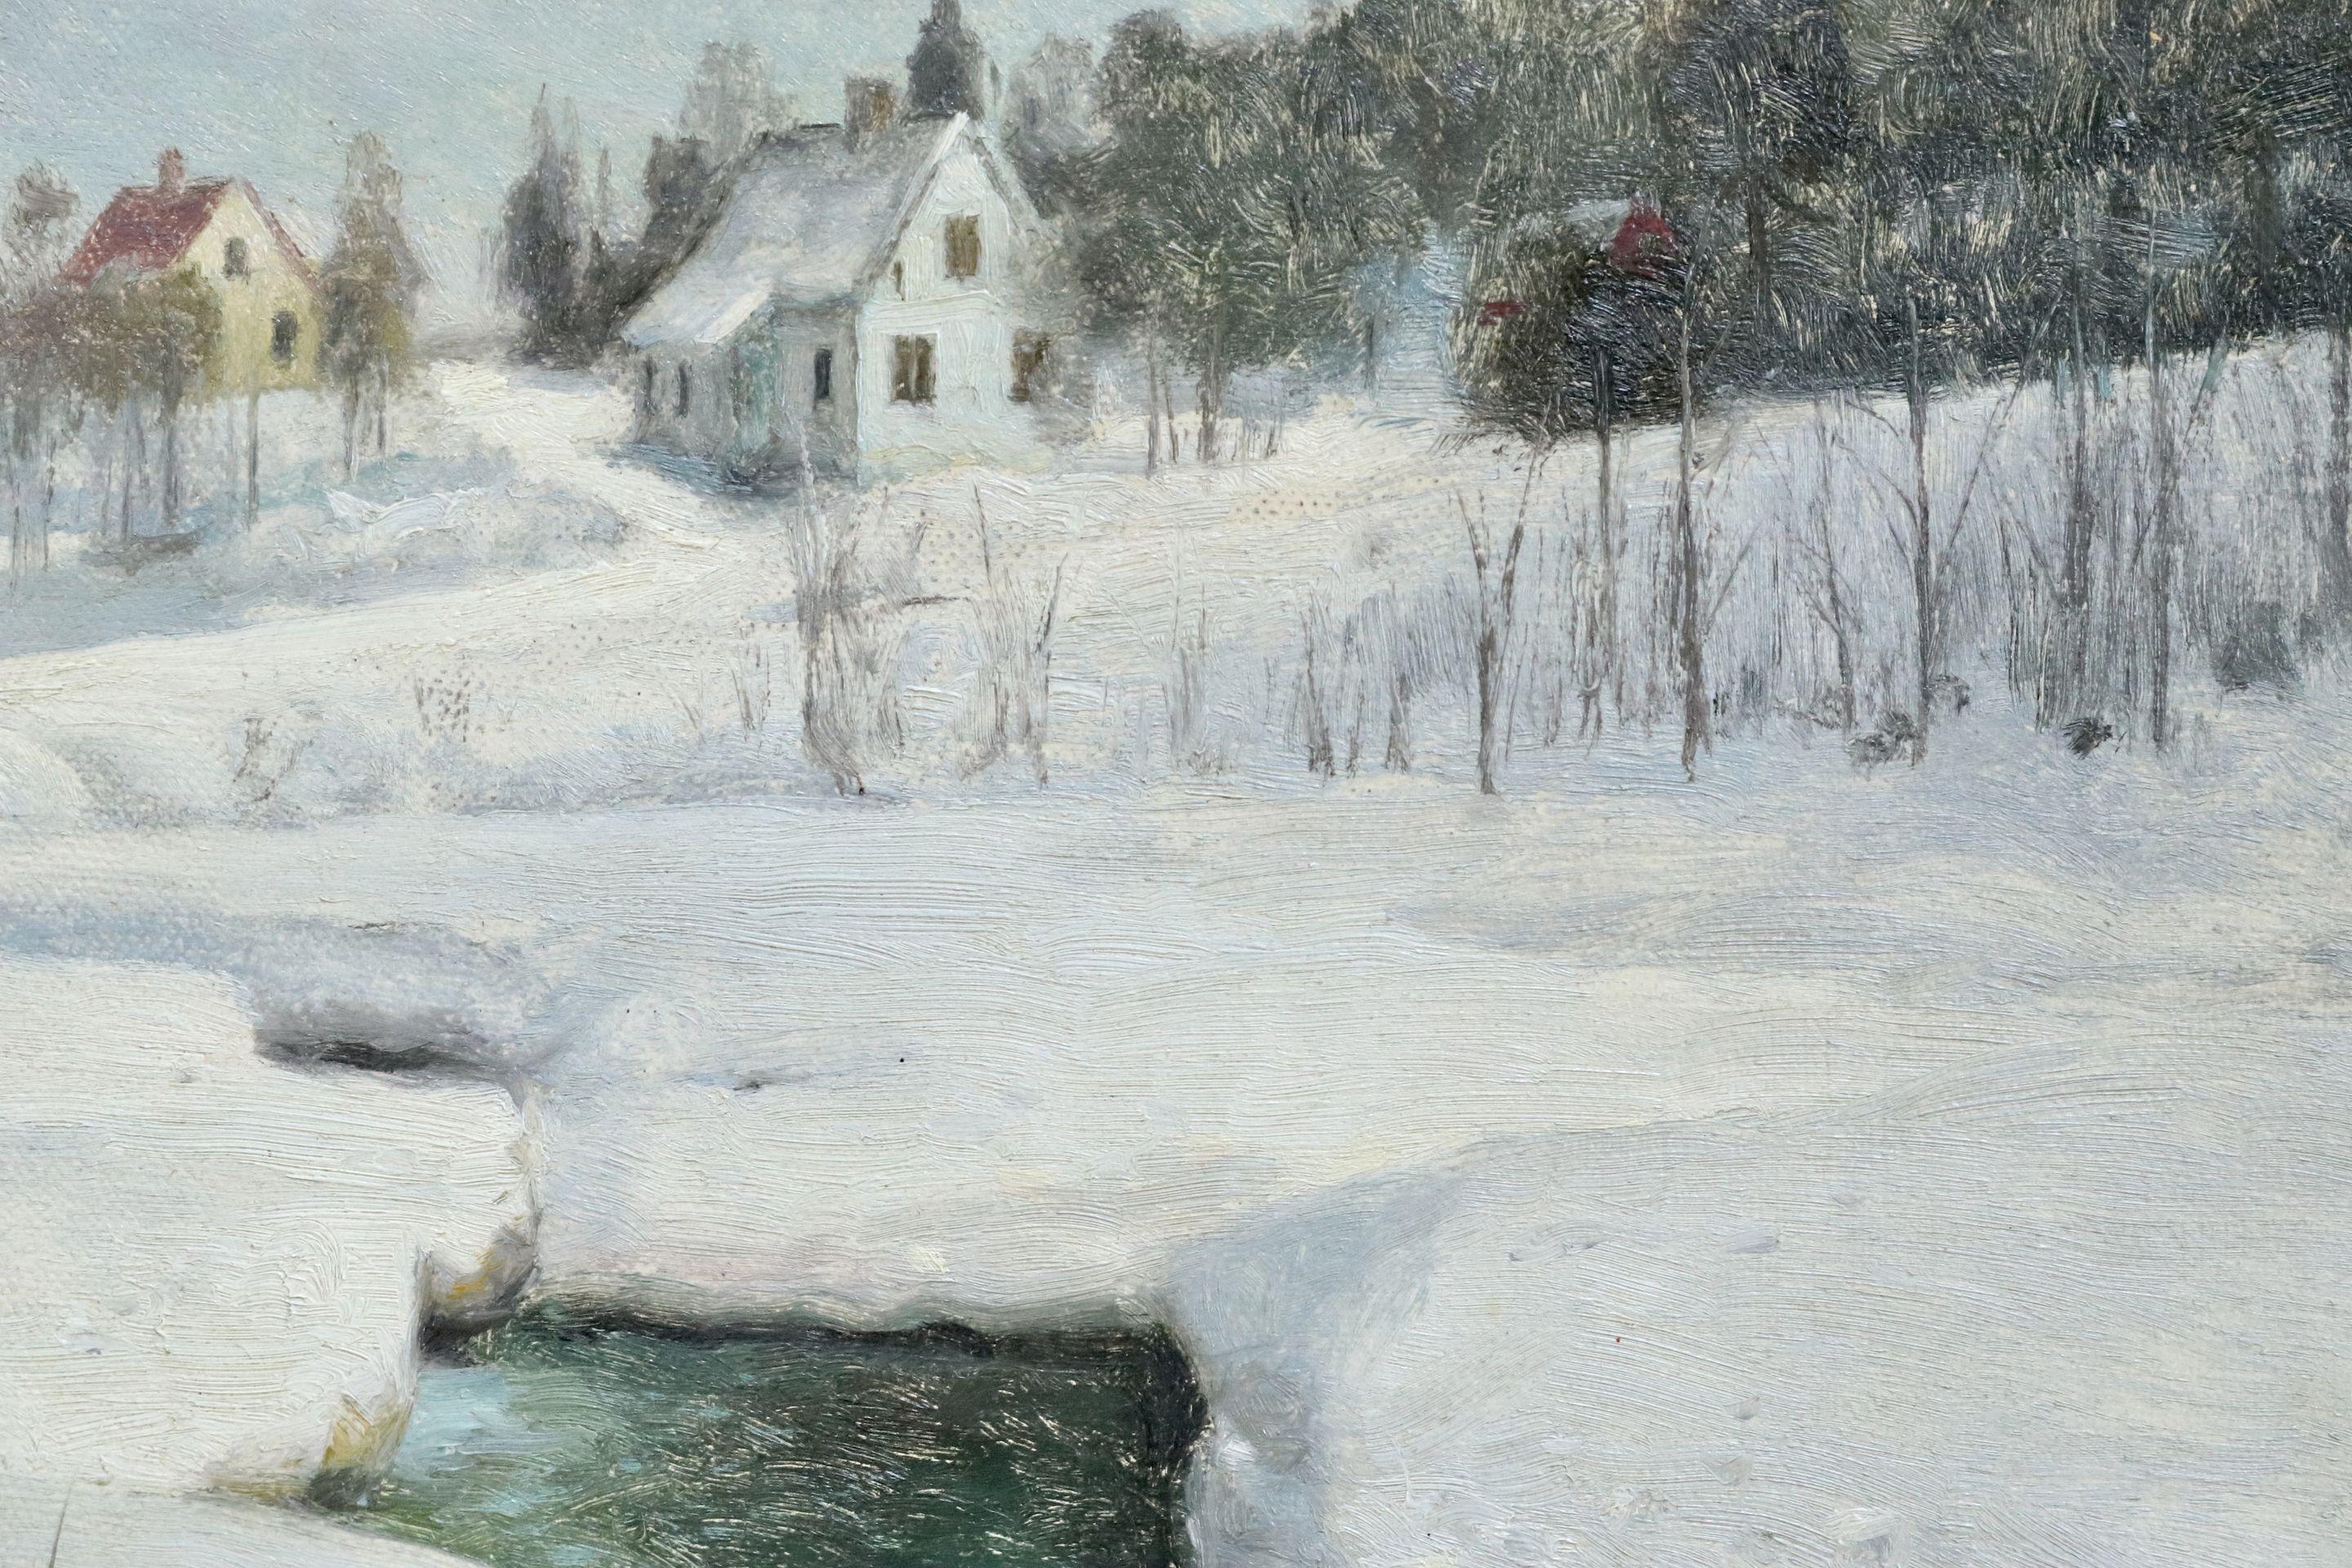 Hundselven, Norway - Winter - 20th Century Oil, Snow Landscape by Peder Monsted 1